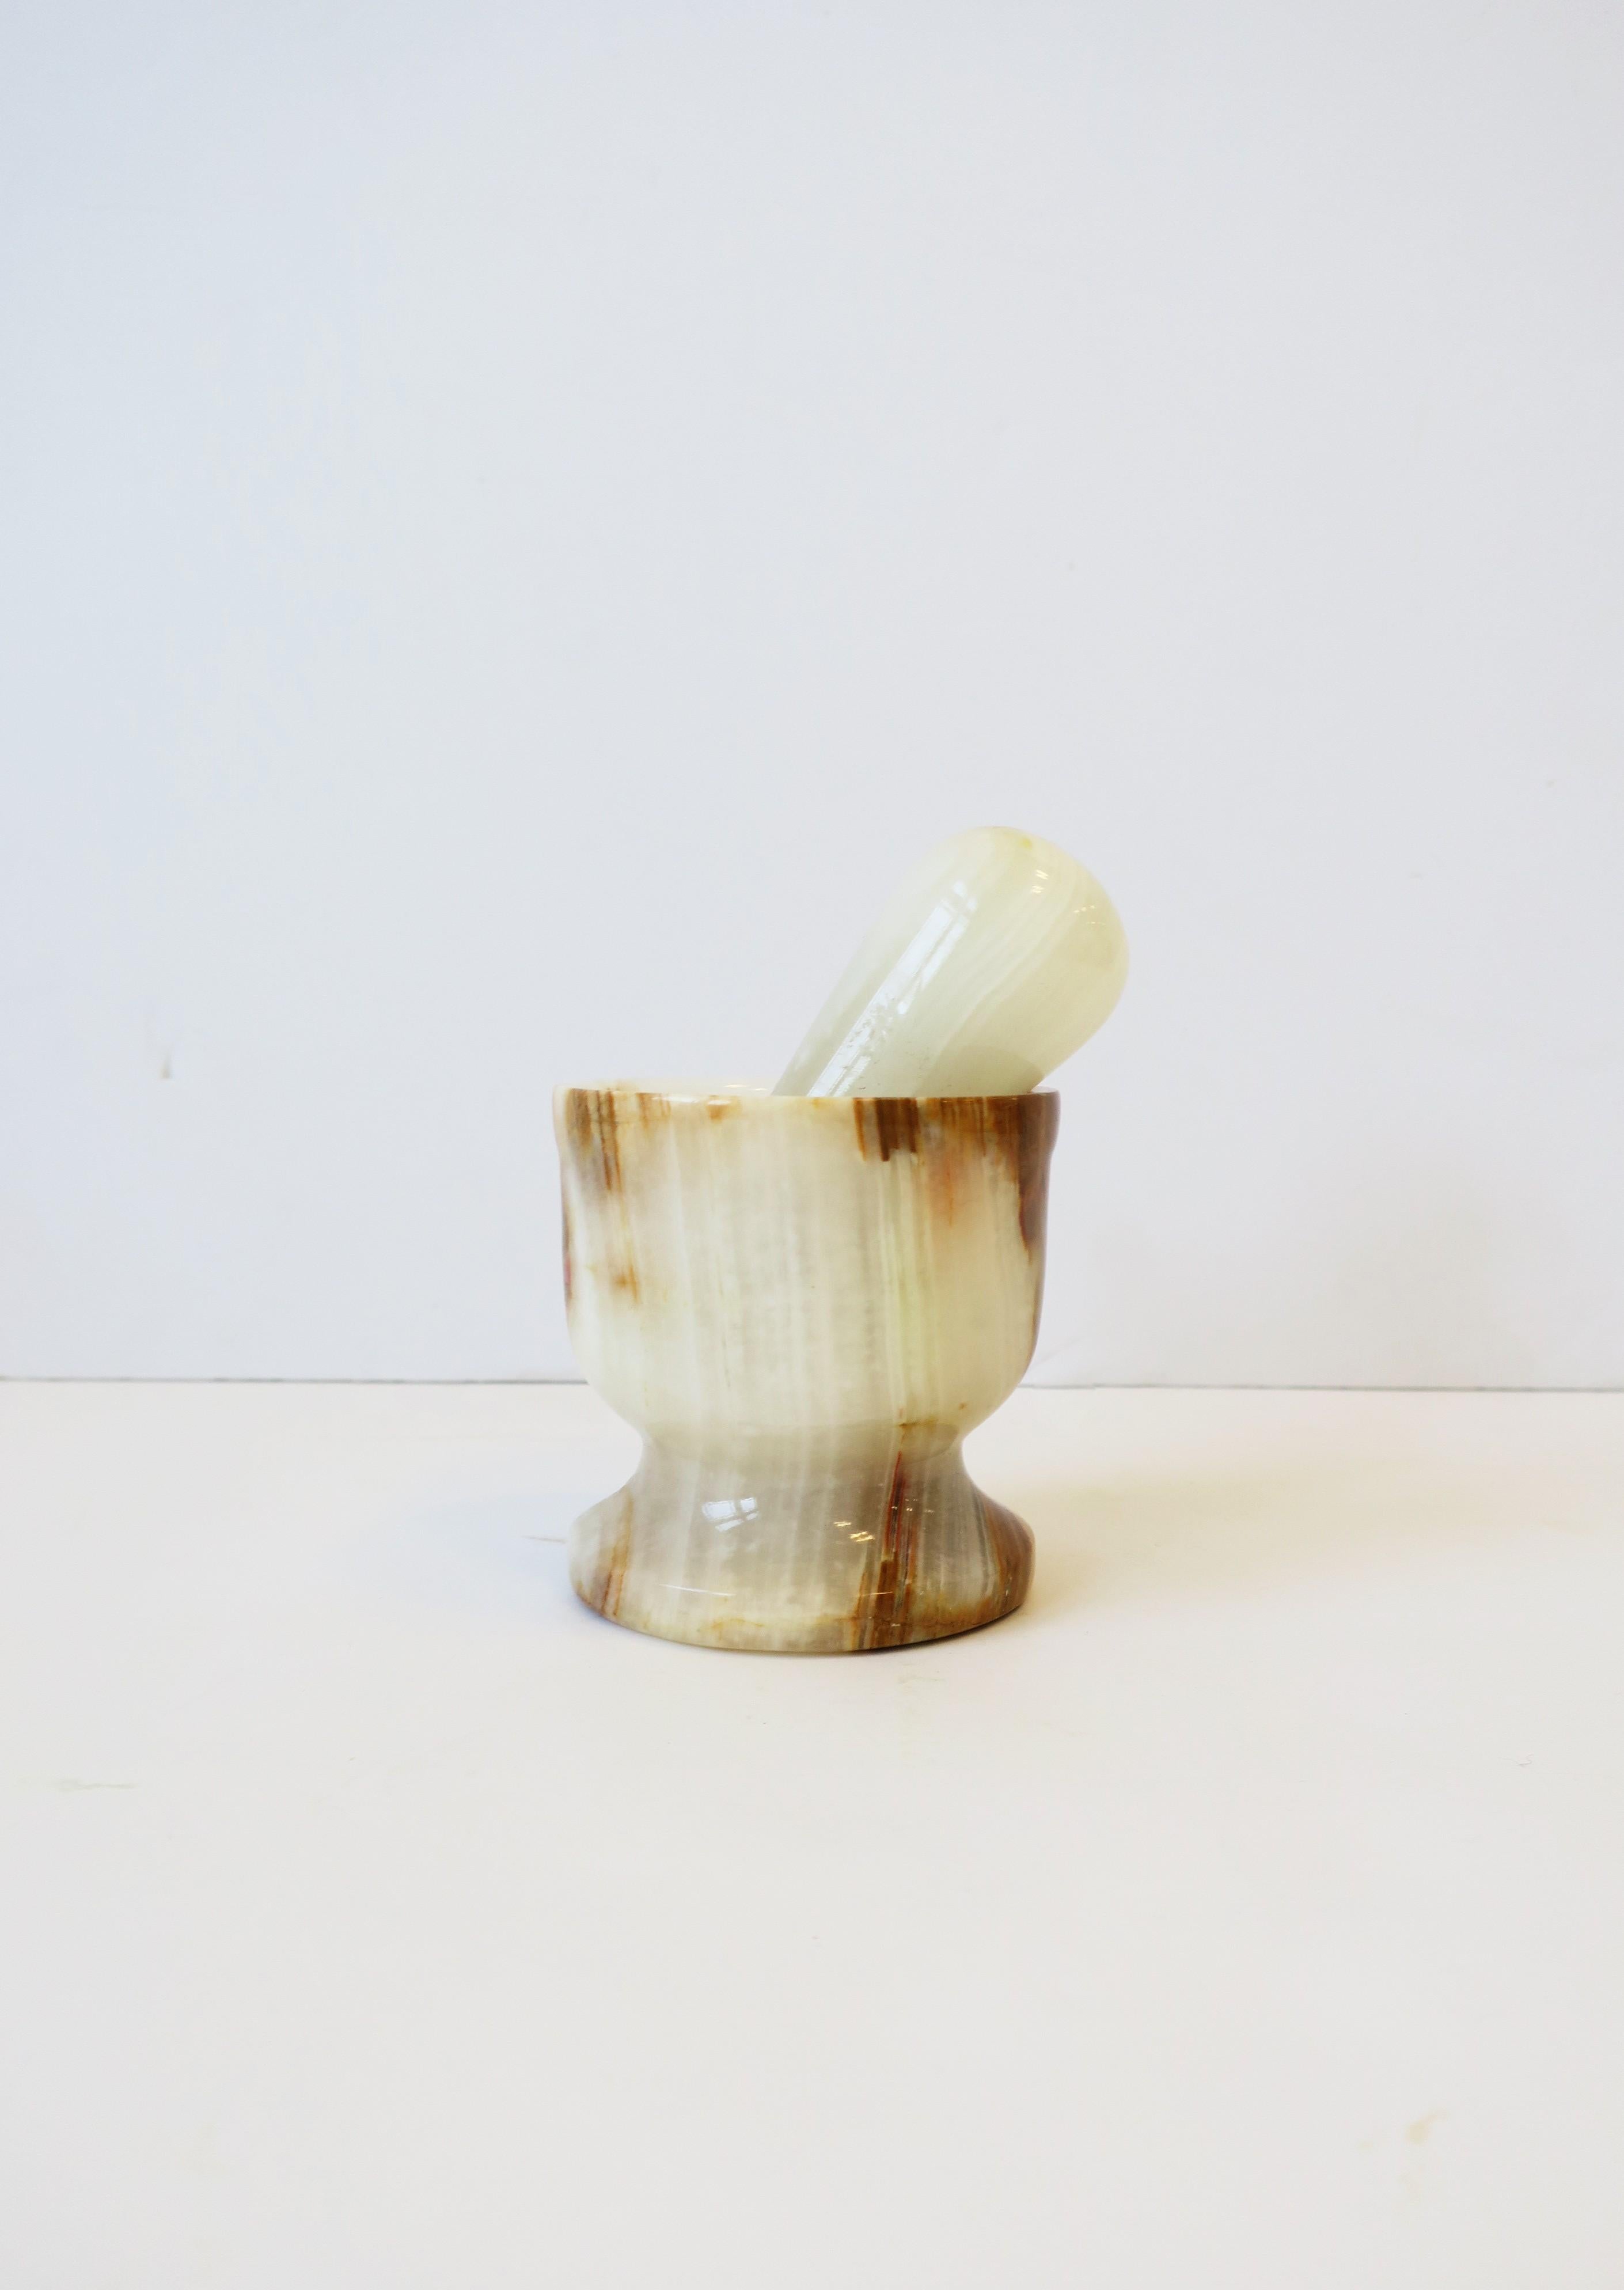 An onyx marble mortar and pestle, circa mid to late-20th century. A great kitchen or bar accessory and a necessity for fine cuisine and cocktail recipes. Dimensions: Mortar, 3